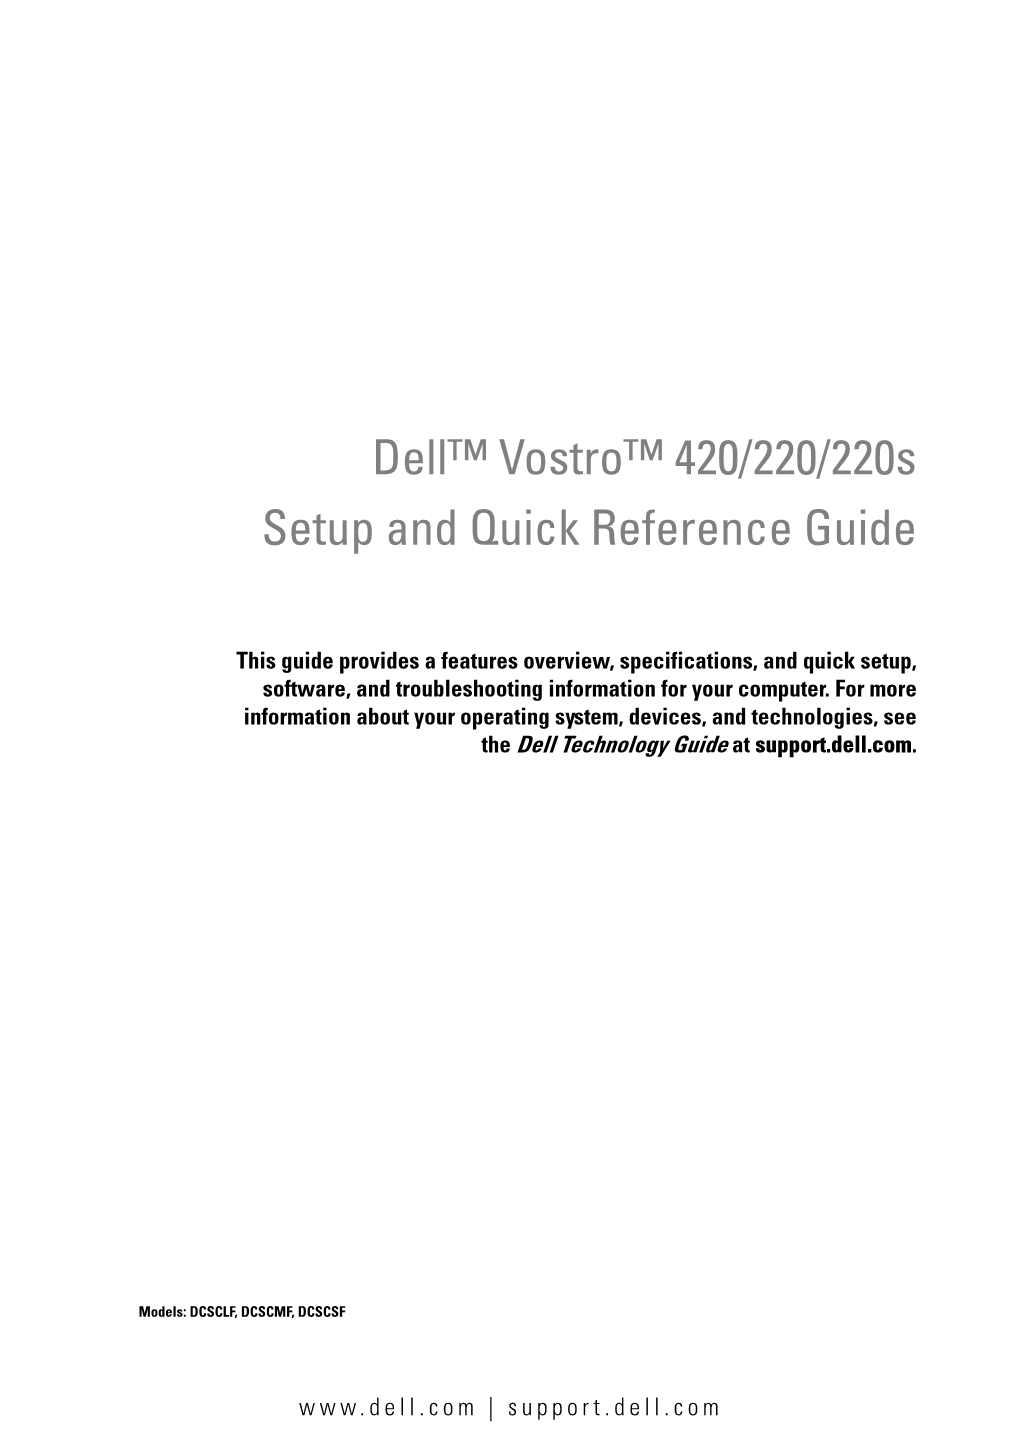 Dell™ Vostro™ 420/220/220S Setup and Quick Reference Guide